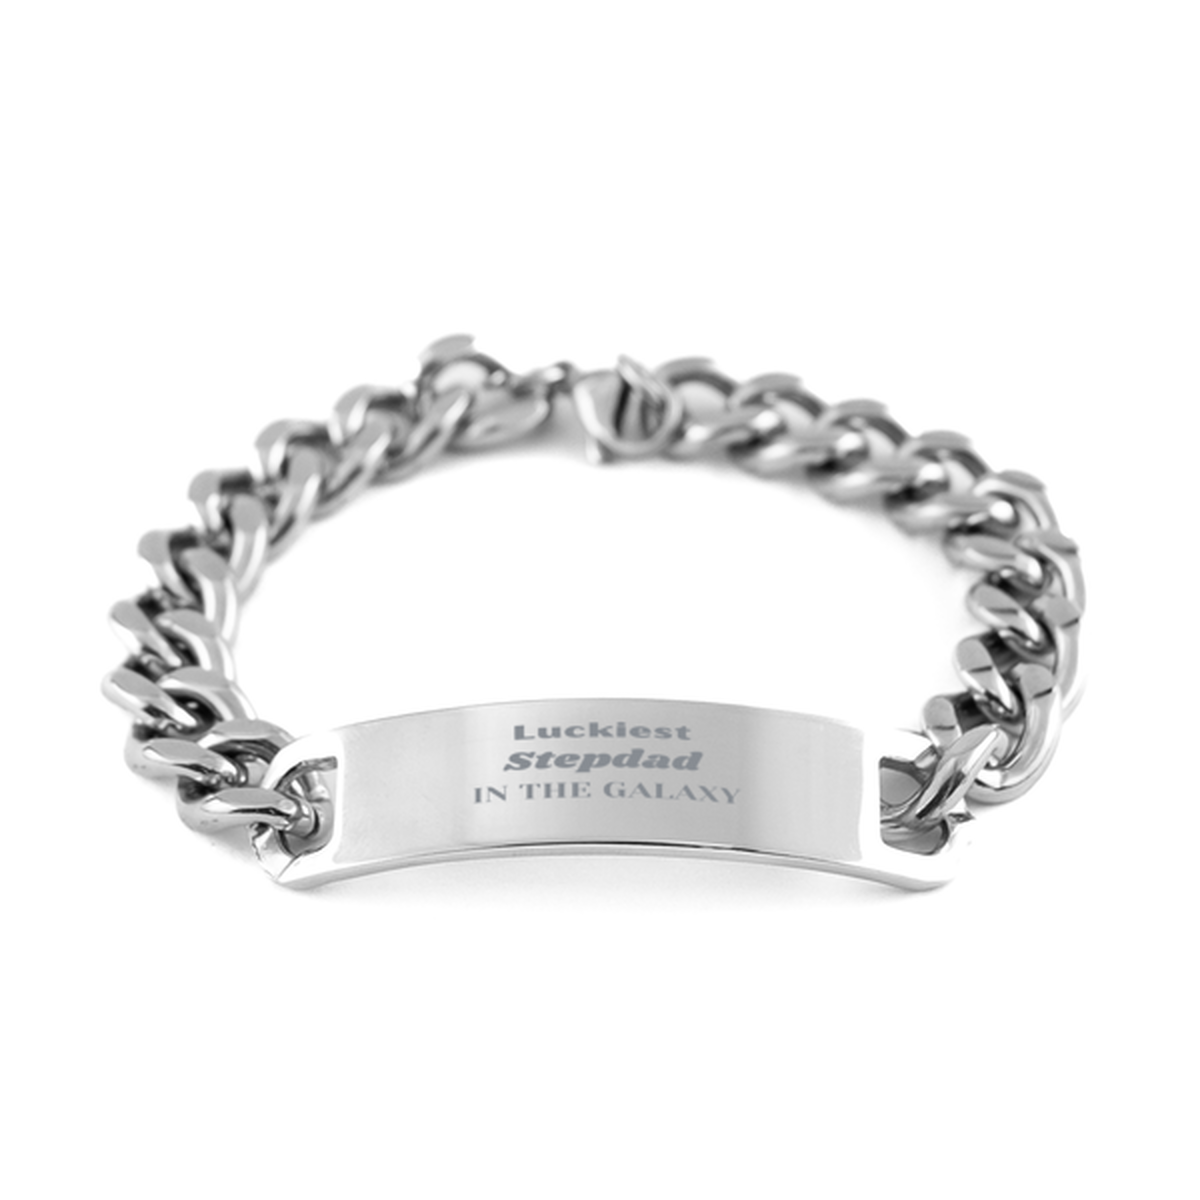 Luckiest Stepdad in the Galaxy, To My Stepdad Engraved Gifts, Christmas Stepdad Cuban Chain Stainless Steel Bracelet Gifts, X-mas Birthday Unique Gifts For Stepdad Men Women